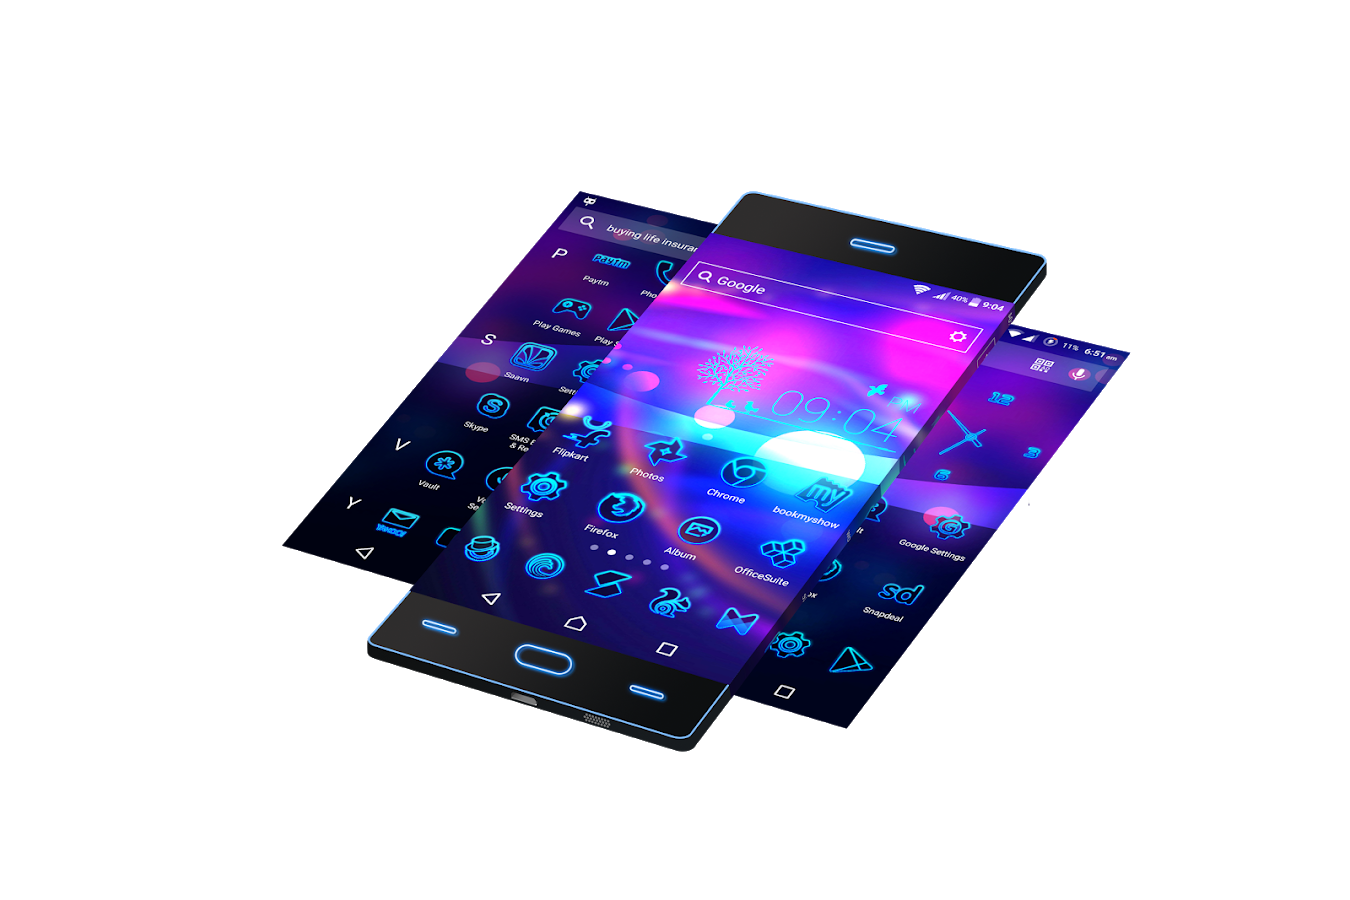 neon 2 hd wallpapers,gadget,mobile phone,communication device,portable communications device,smartphone